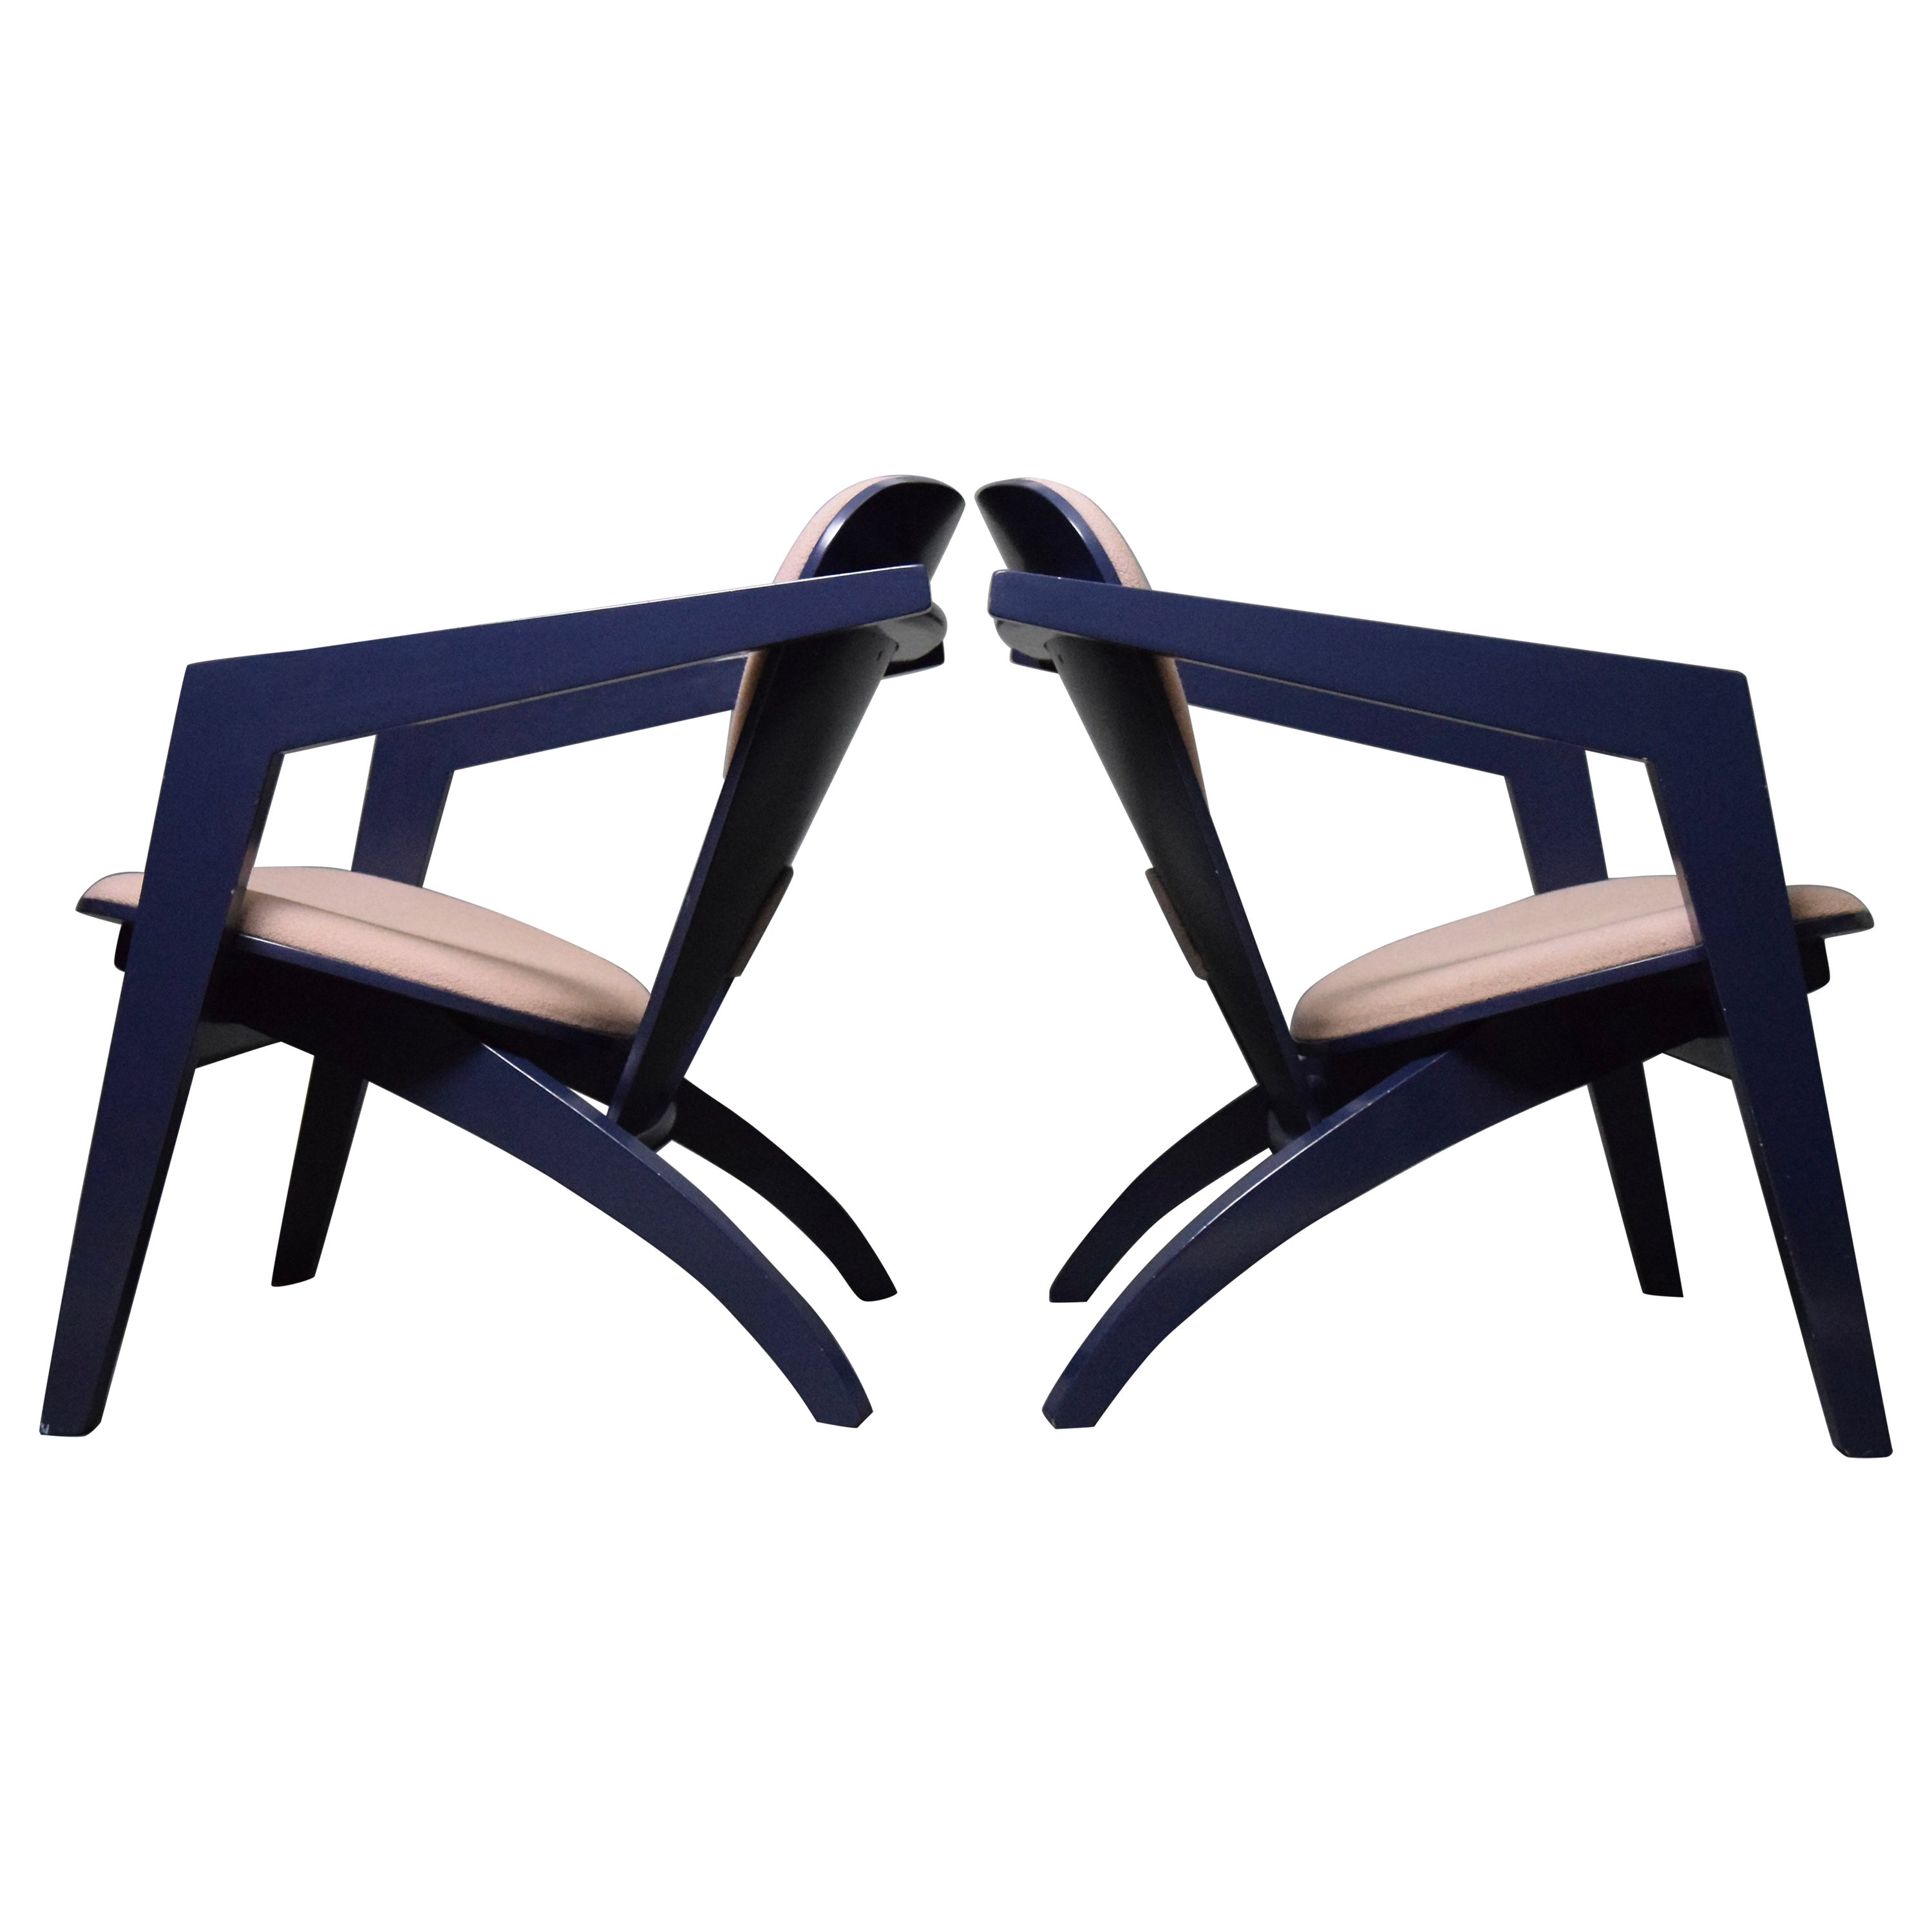 1980 Butterfly Blue Lounge Chair GE 460 Designed by Hans Wegner